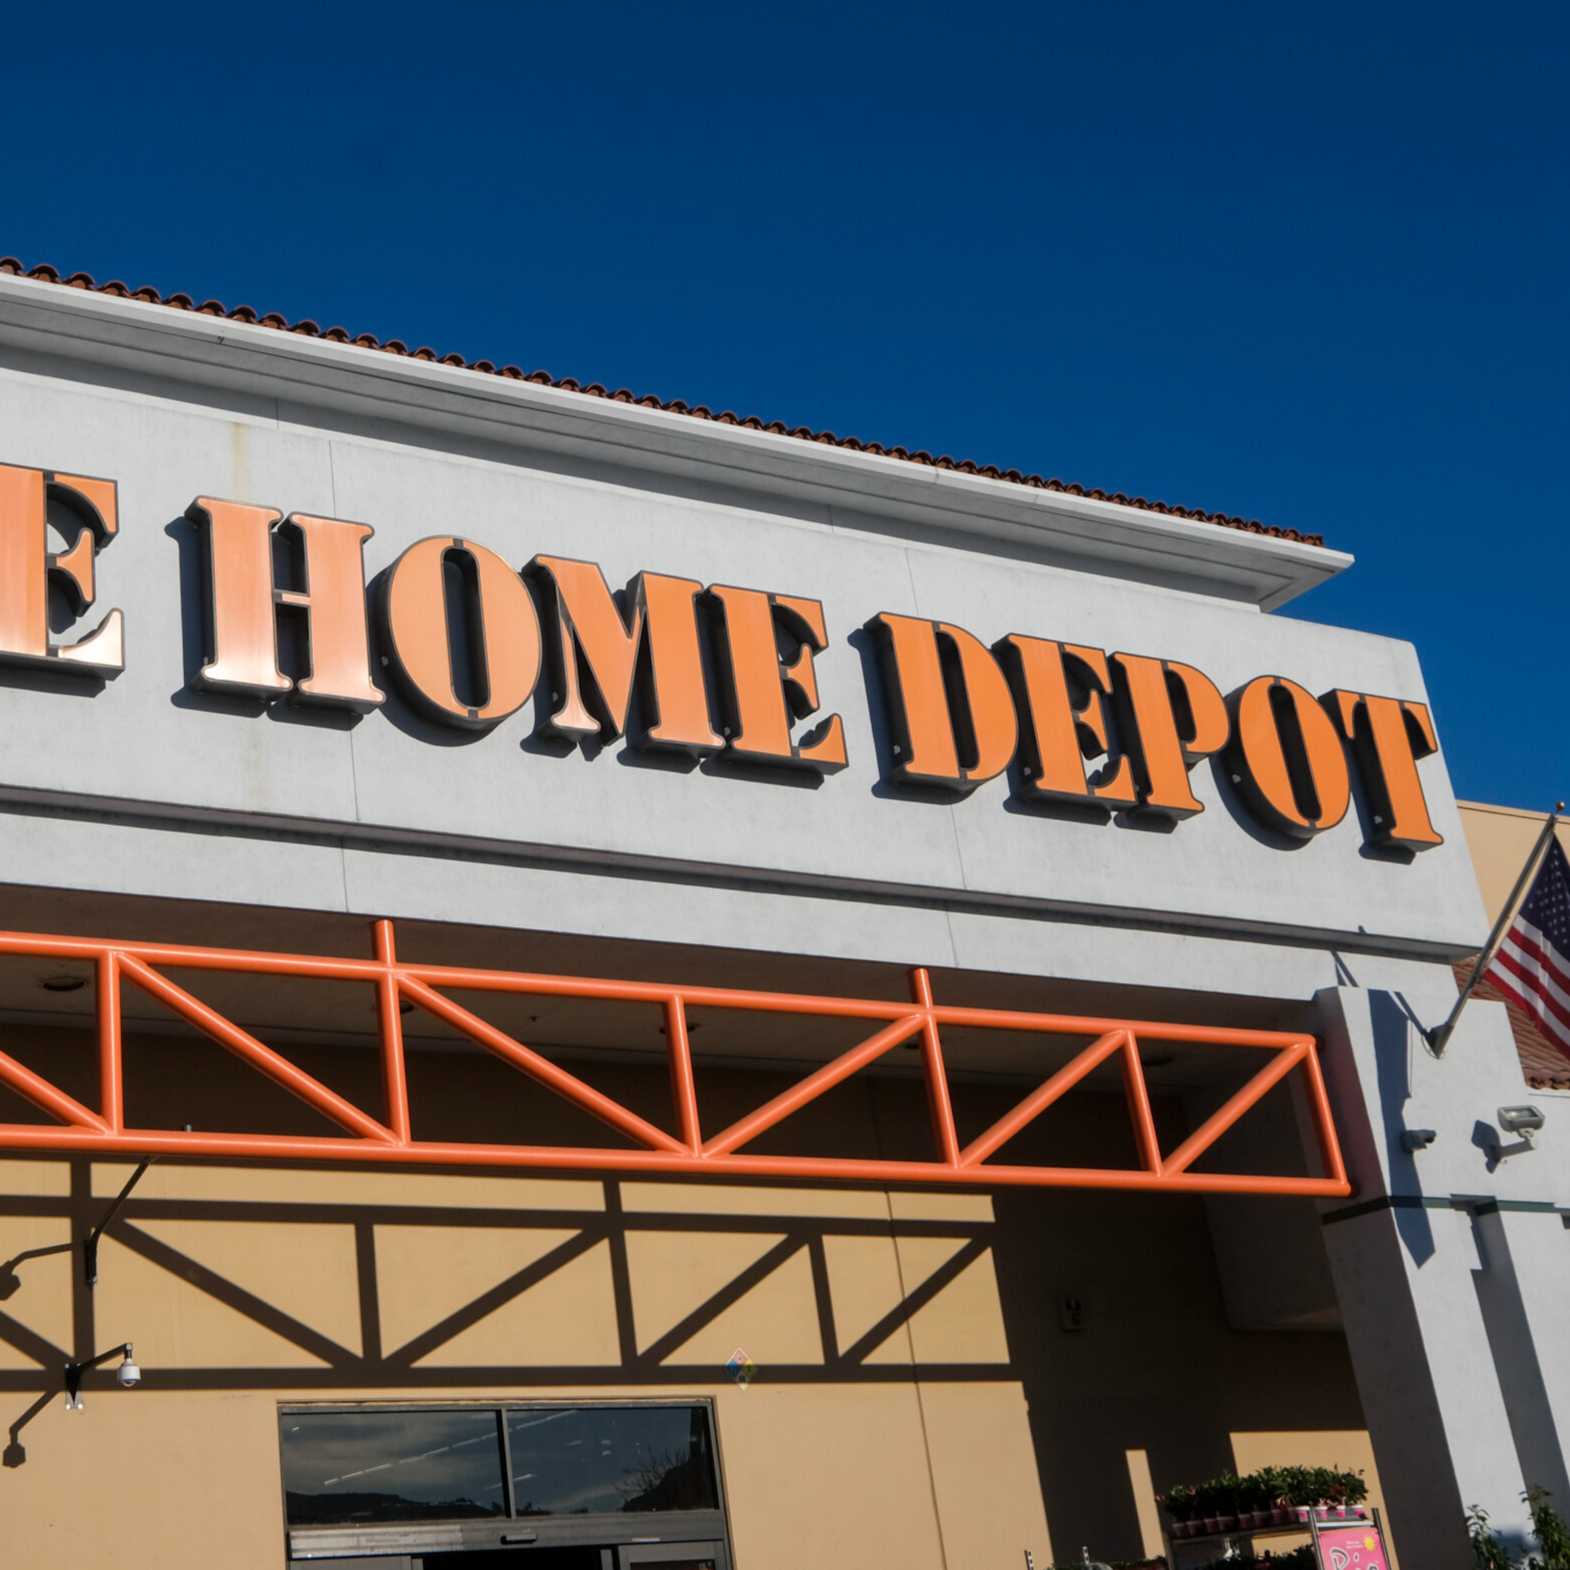 Welcome to Official Homedepot Survey